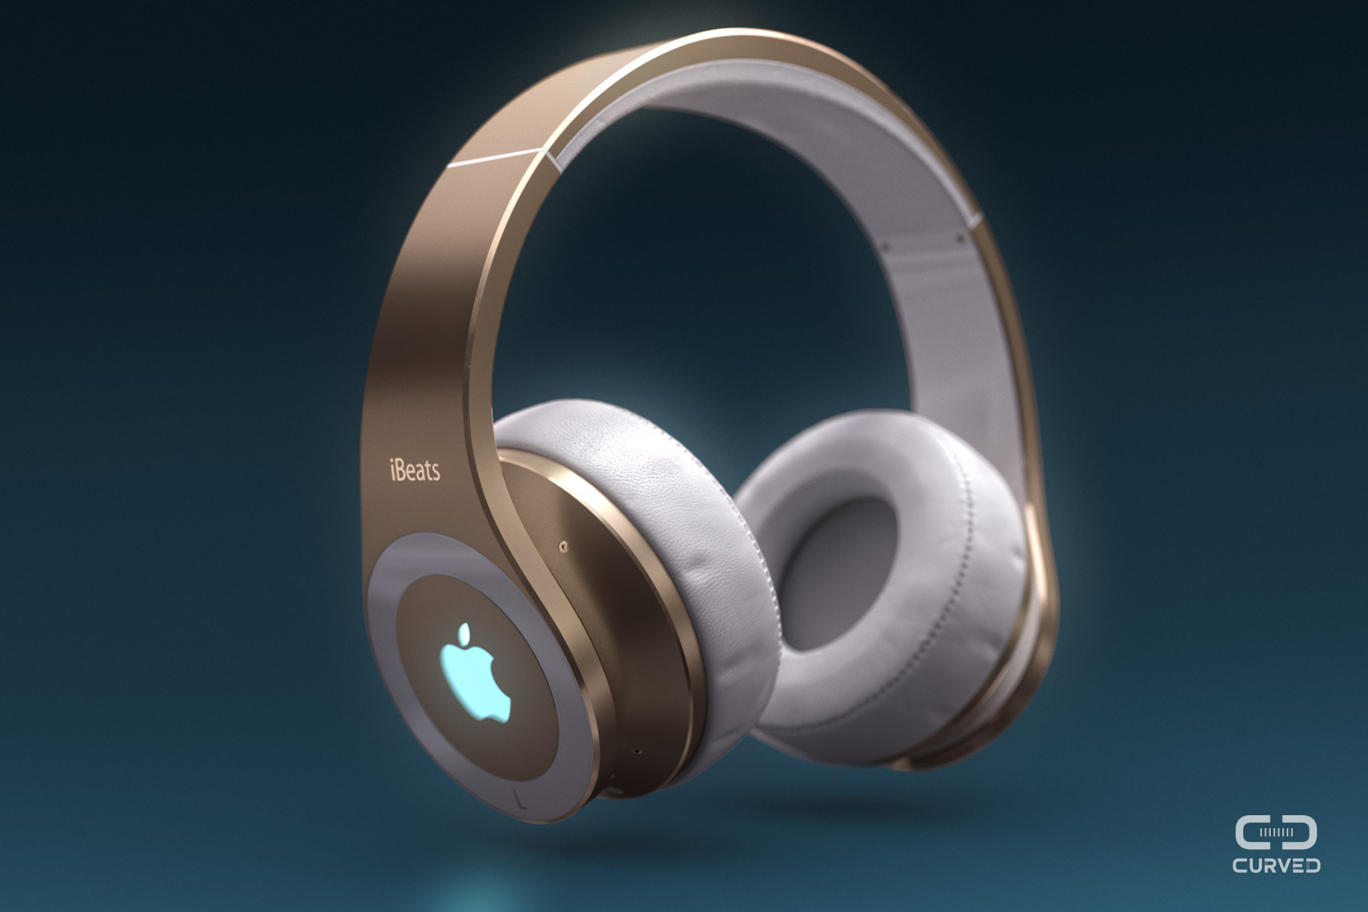 Apple-iBeats-Concept-Takes-the-High-End-Headphones-to-the-Next-Level-Gallery-Video-454937-2.jpg